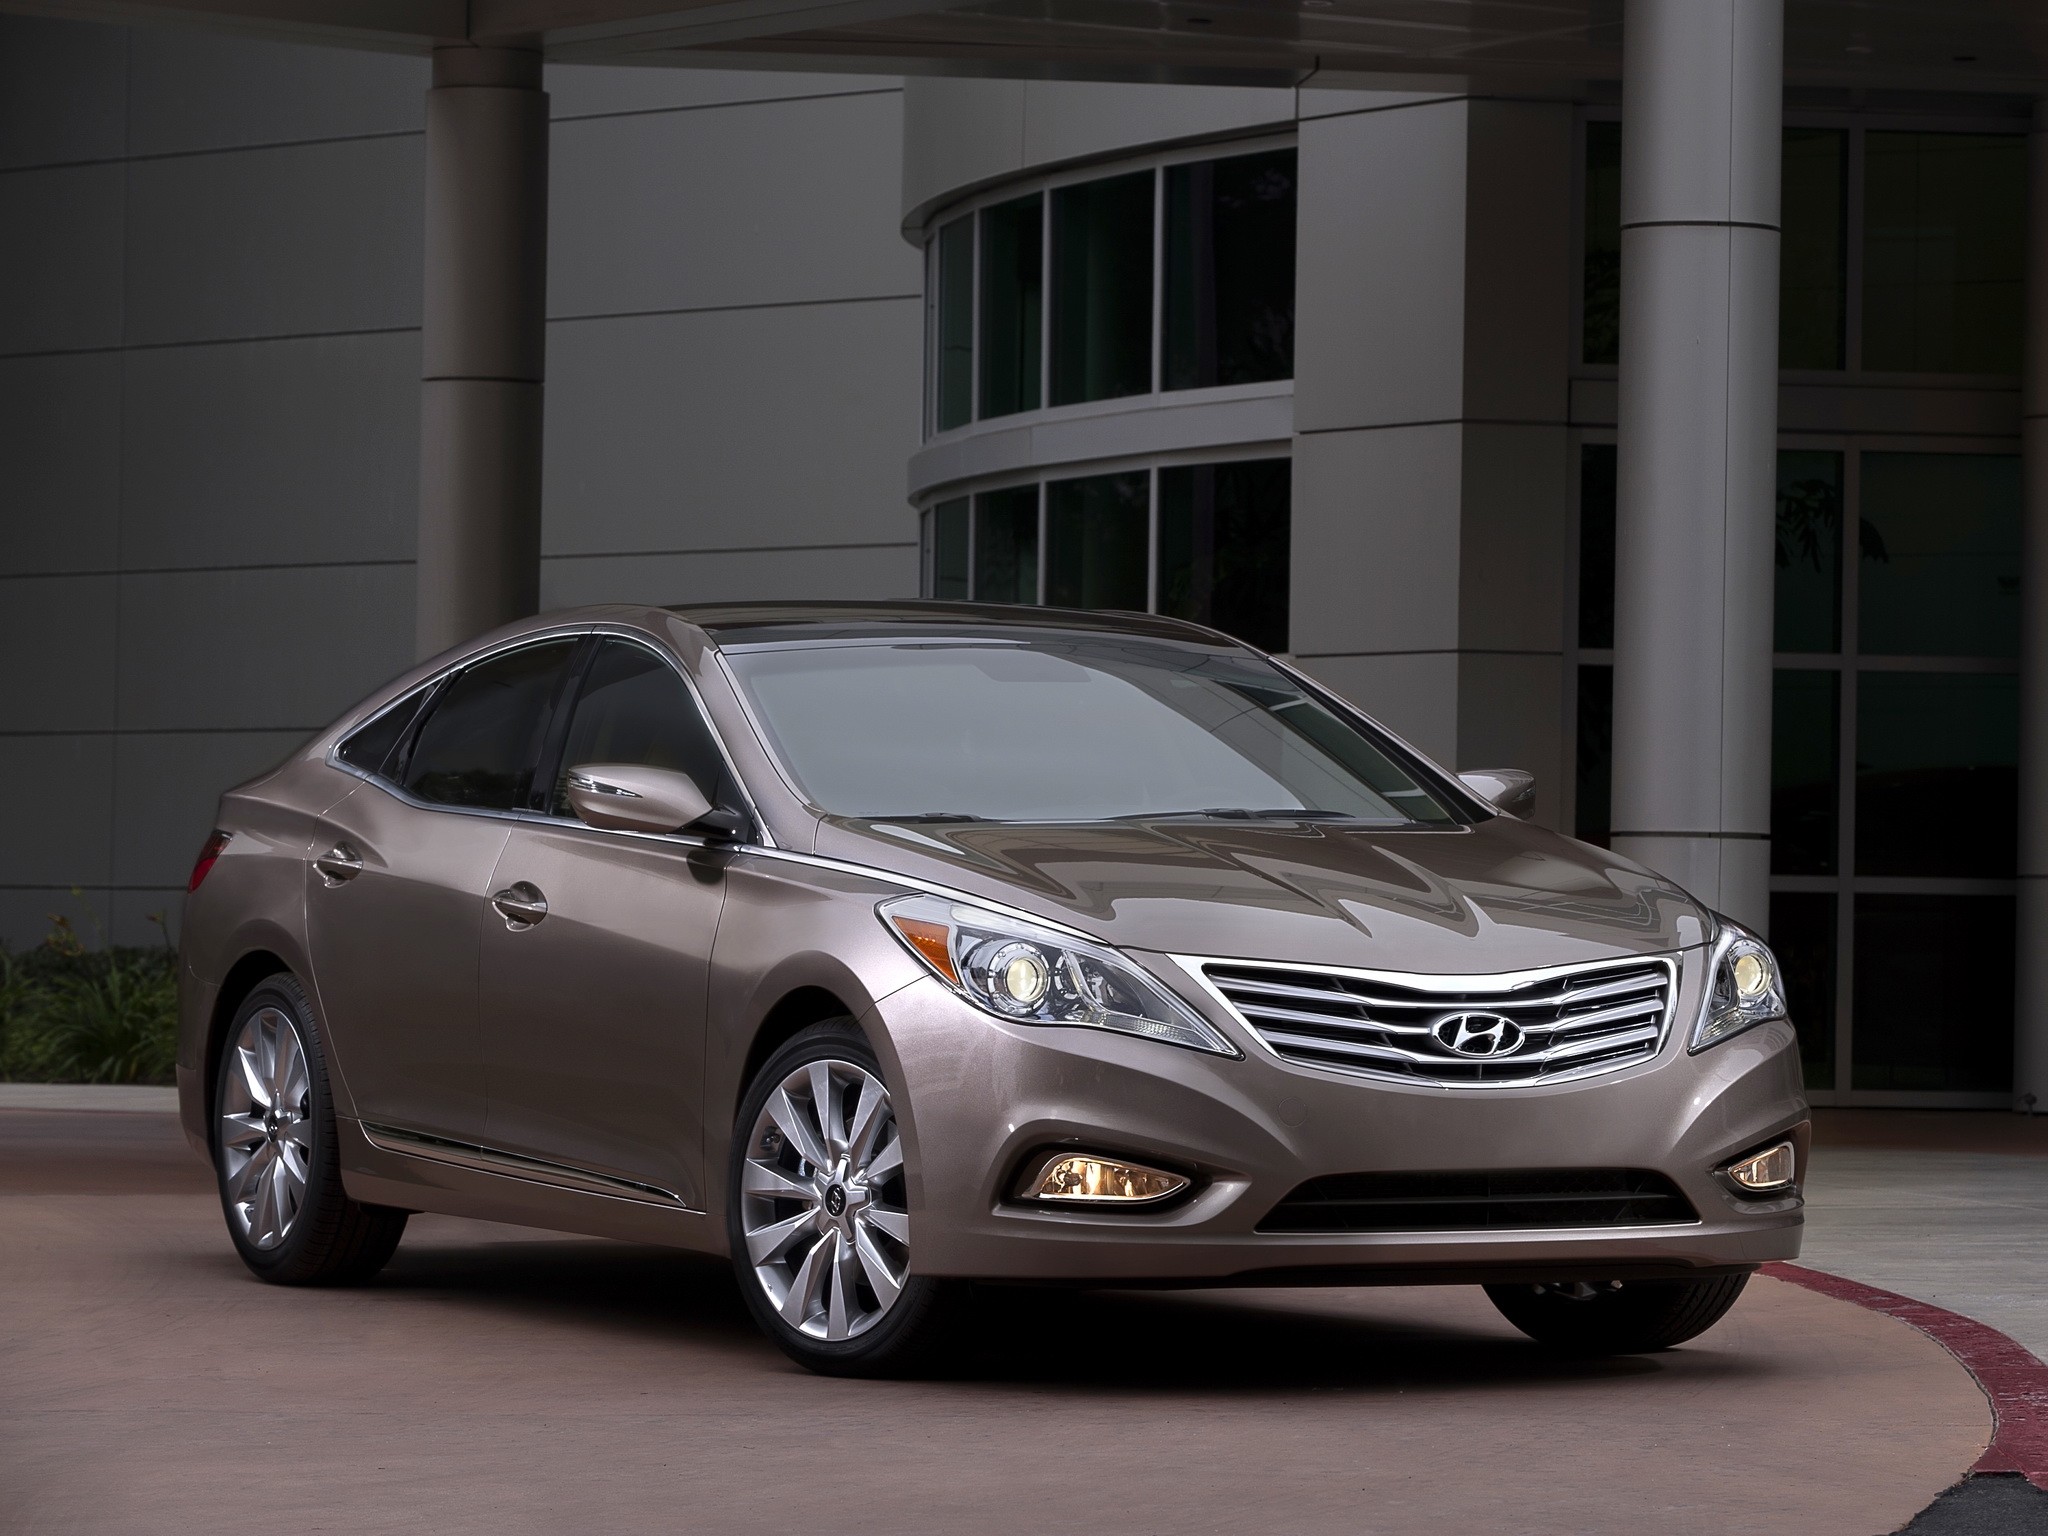 The first generation sonata, which was introduced in 1985, was a facelifted hyundai stellar with an engine upgrade, and was withdrawn from the market in two years due to poor customer reaction. HYUNDAI Azera specs - 2012, 2013, 2014, 2015, 2016, 2017